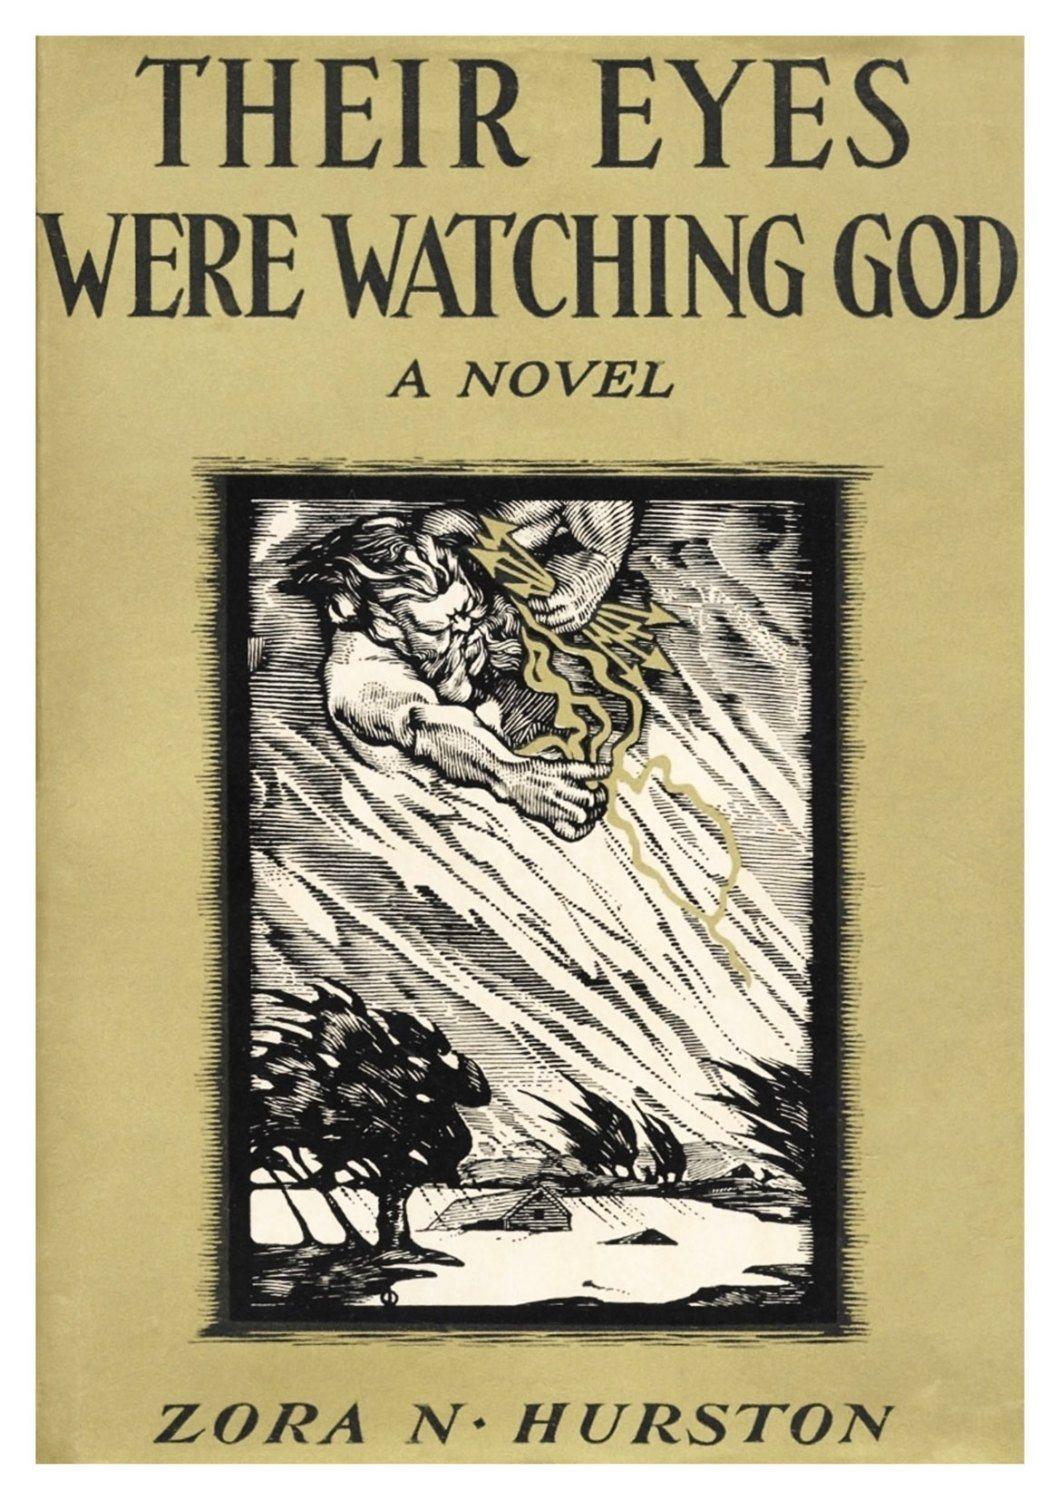 VINTAGE BOOK COVER: Their Eyes Were Watching God - Pimlico Prints